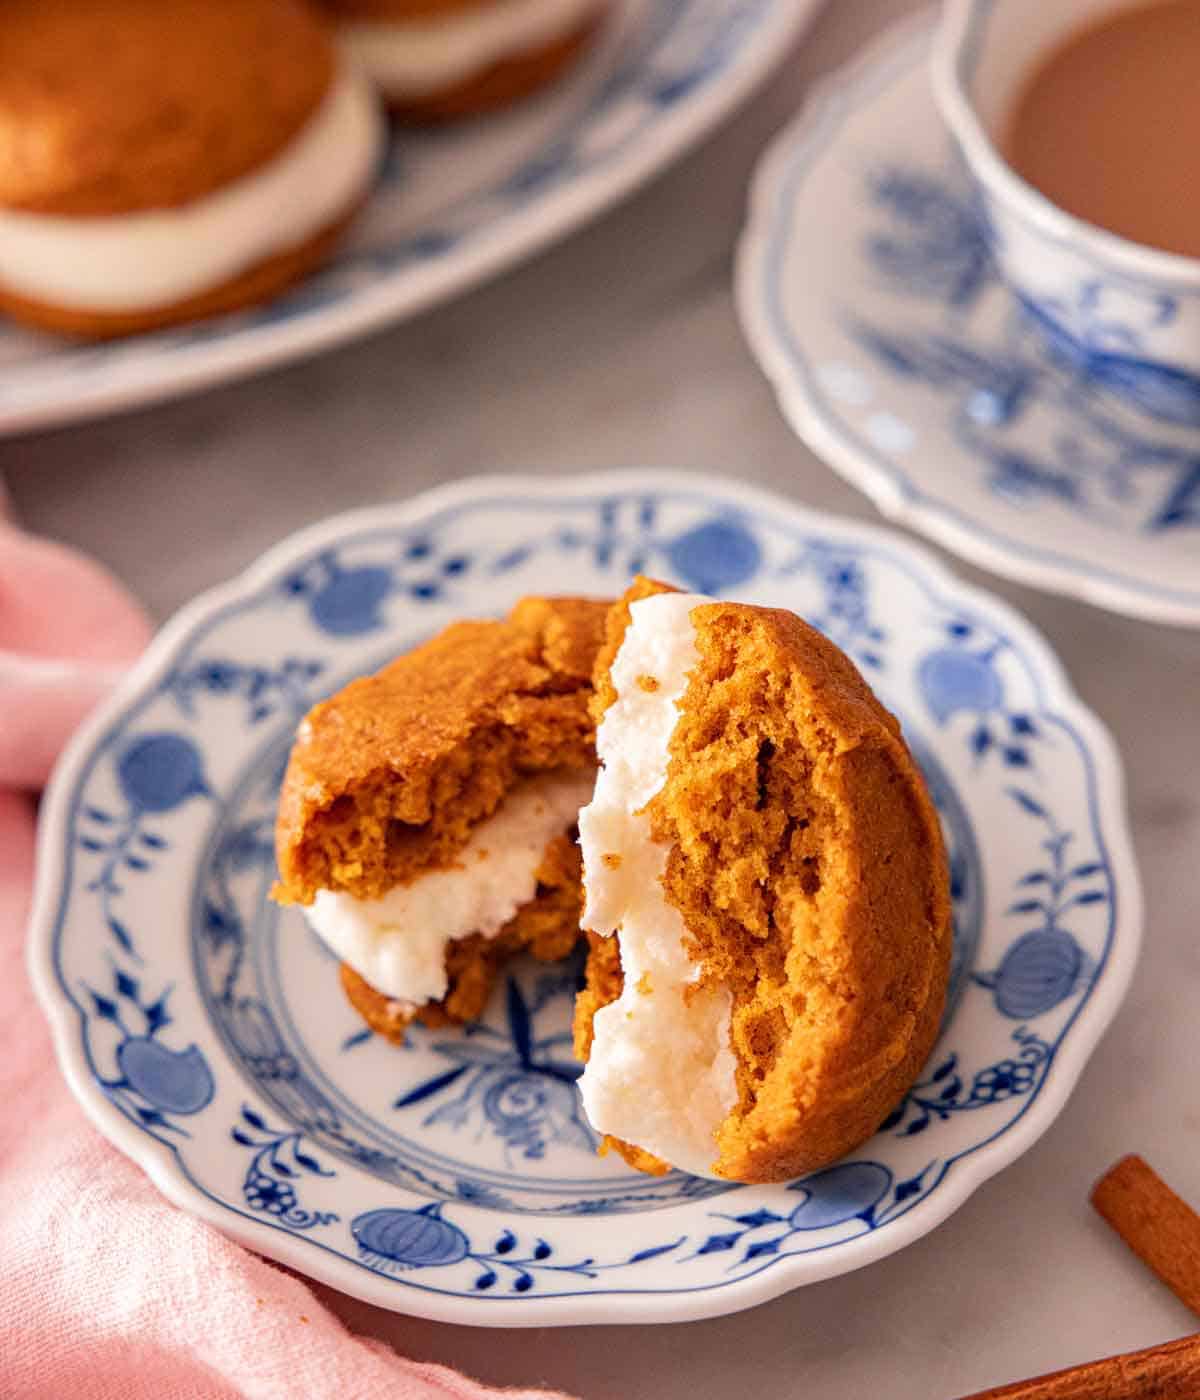 A plate with a pumpkin whoopie pie torn in half, showing the cream in the middle.